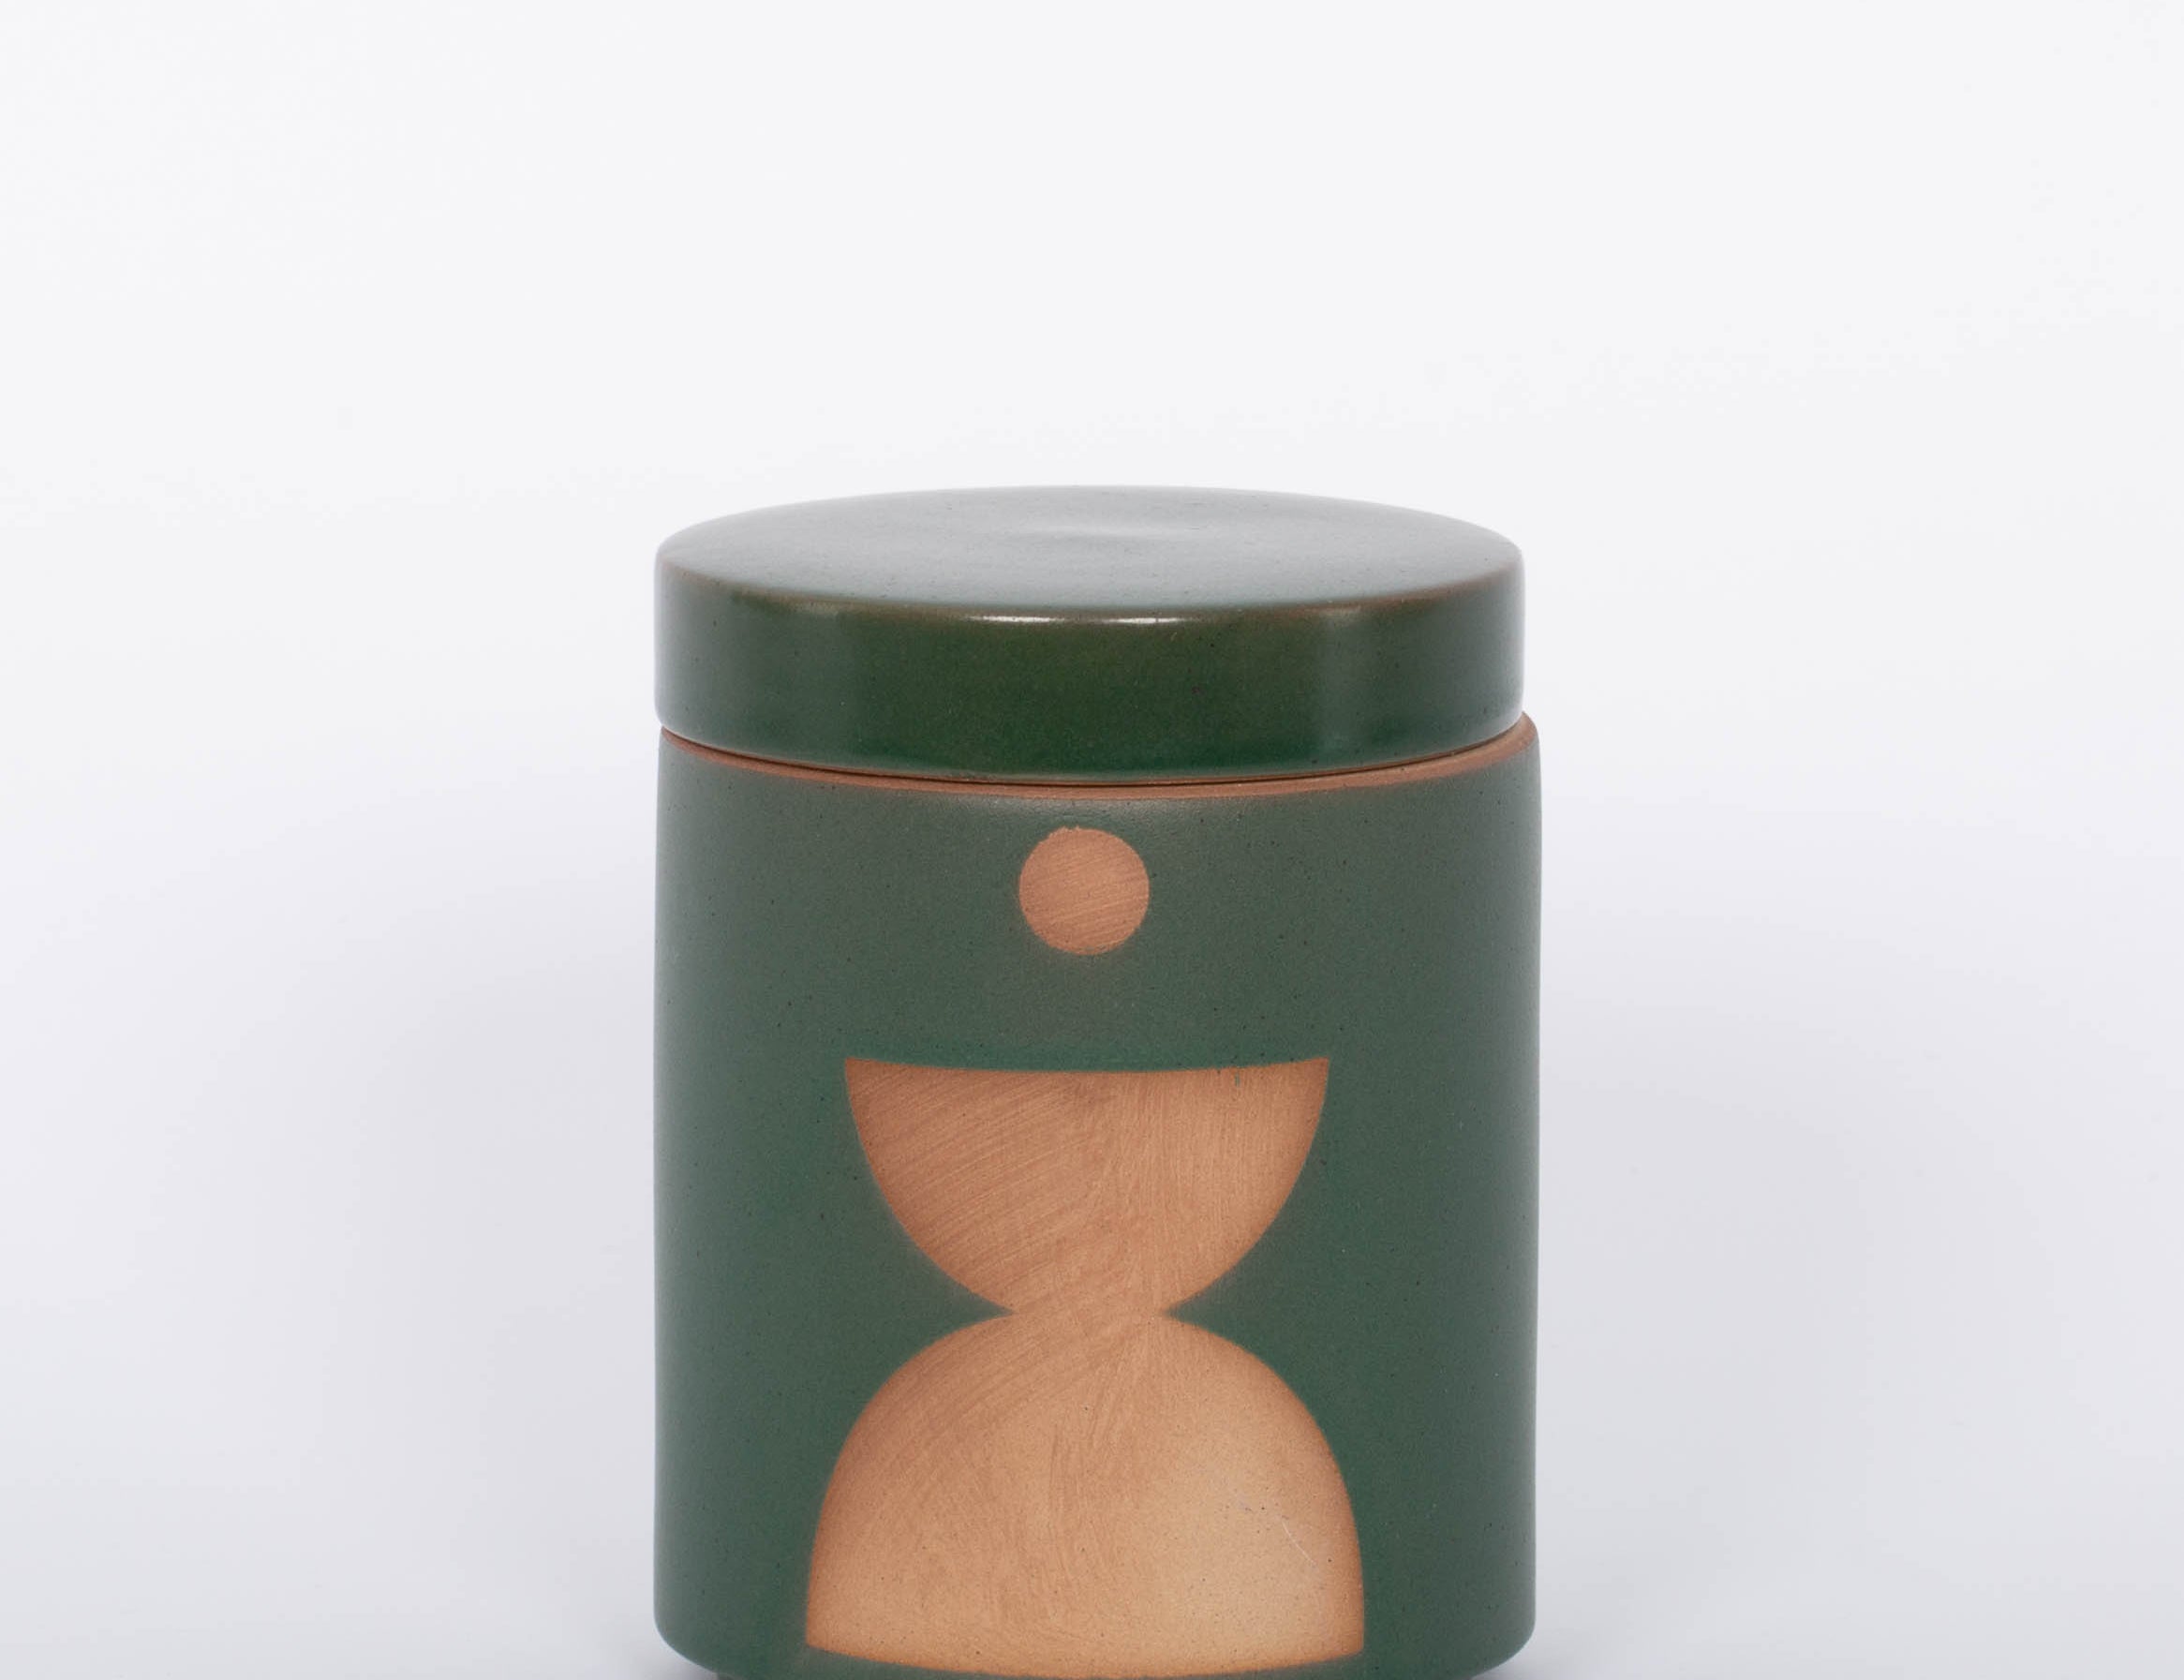 Spanish Moss Candle. Dark green and earth brown. Ceramic vessel with raw block shape and hole in bottom, serves as a perfect planter after candle is used up. 